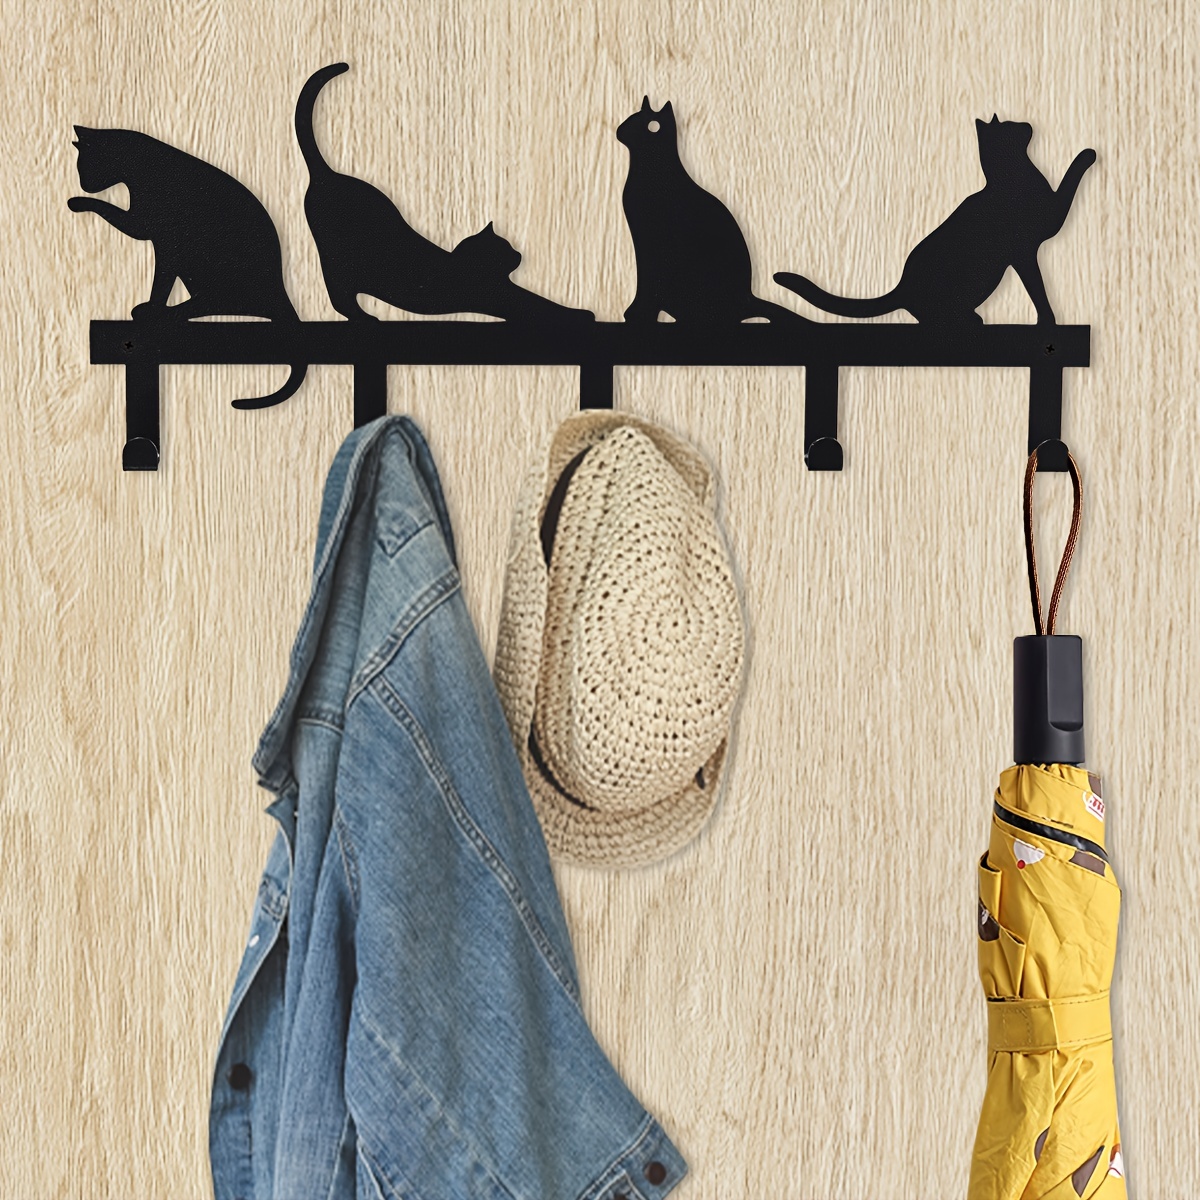 1pc Key Holder For Wall - Rustic Key Hooks For Wall For Hanging  Accessories, Key Hanger For Wall For Farmhouse-Style Homes Iron Wall Key  Holder, Cats